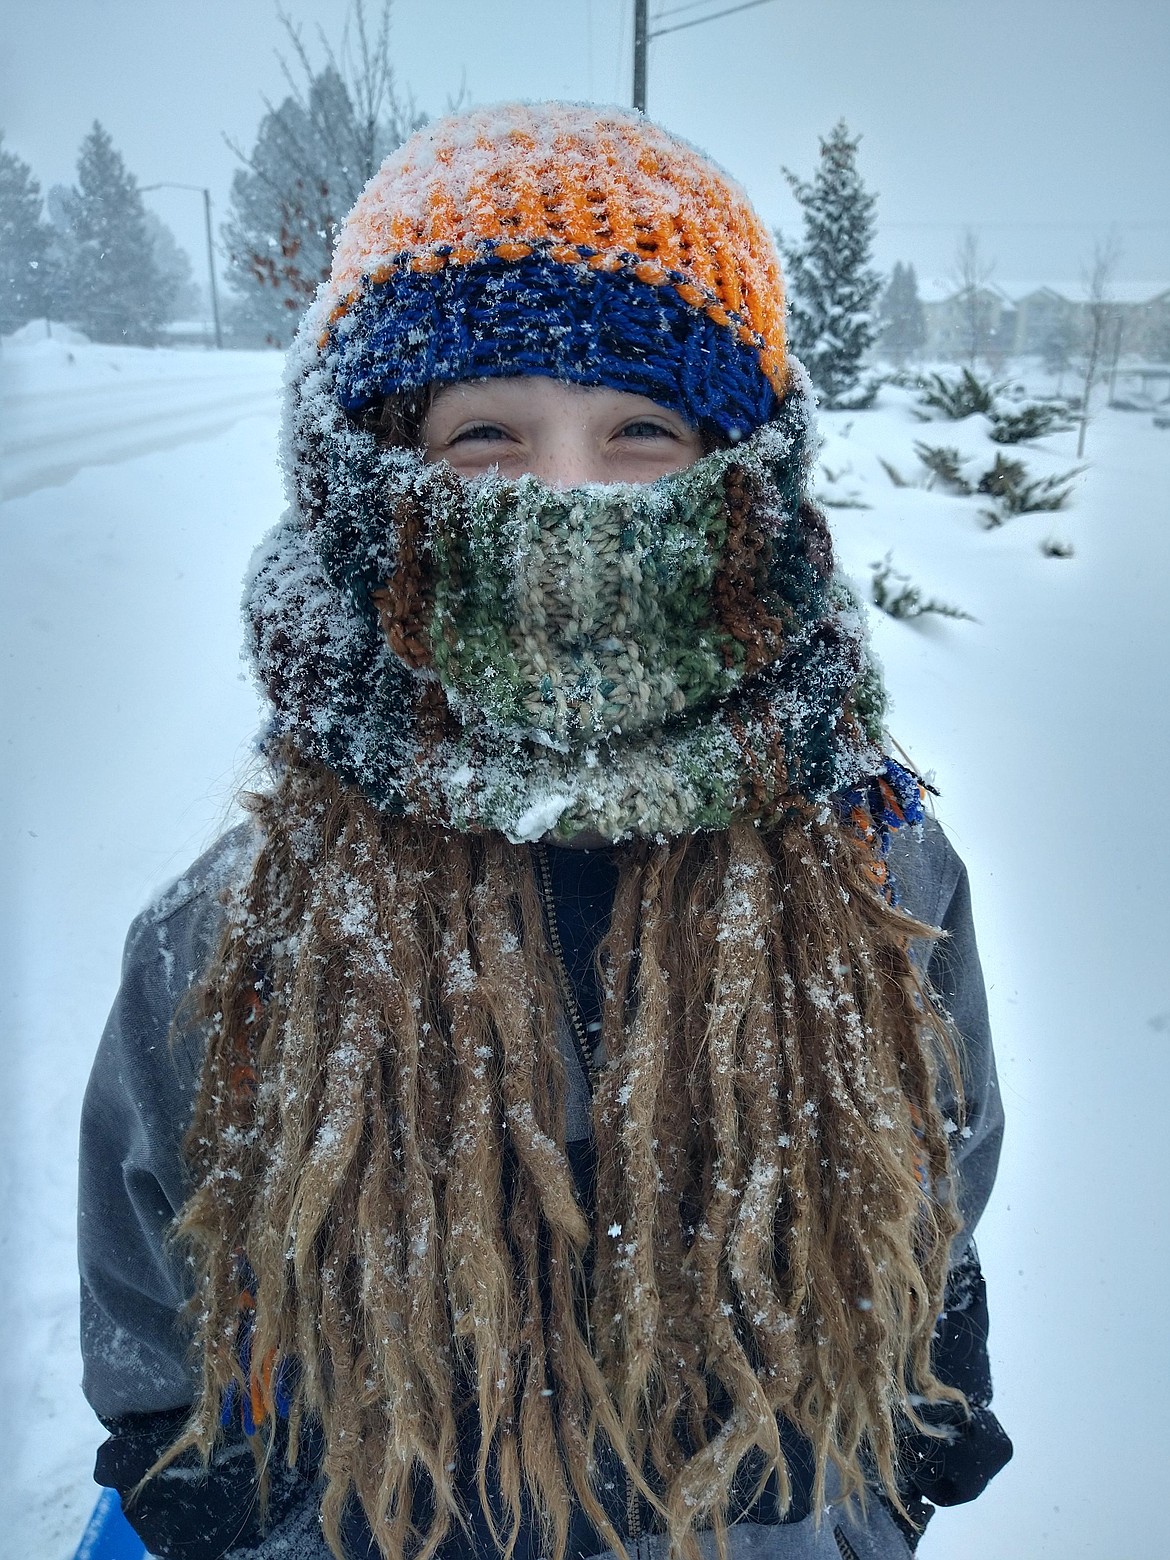 "This is my grandson, Ozzie Jenkins, on Dec. 20 in Coeur d'Alene. It like 16 degrees and snowing!!" (photo by Brooks Jenkins. Submitted by Denise Tuten.)